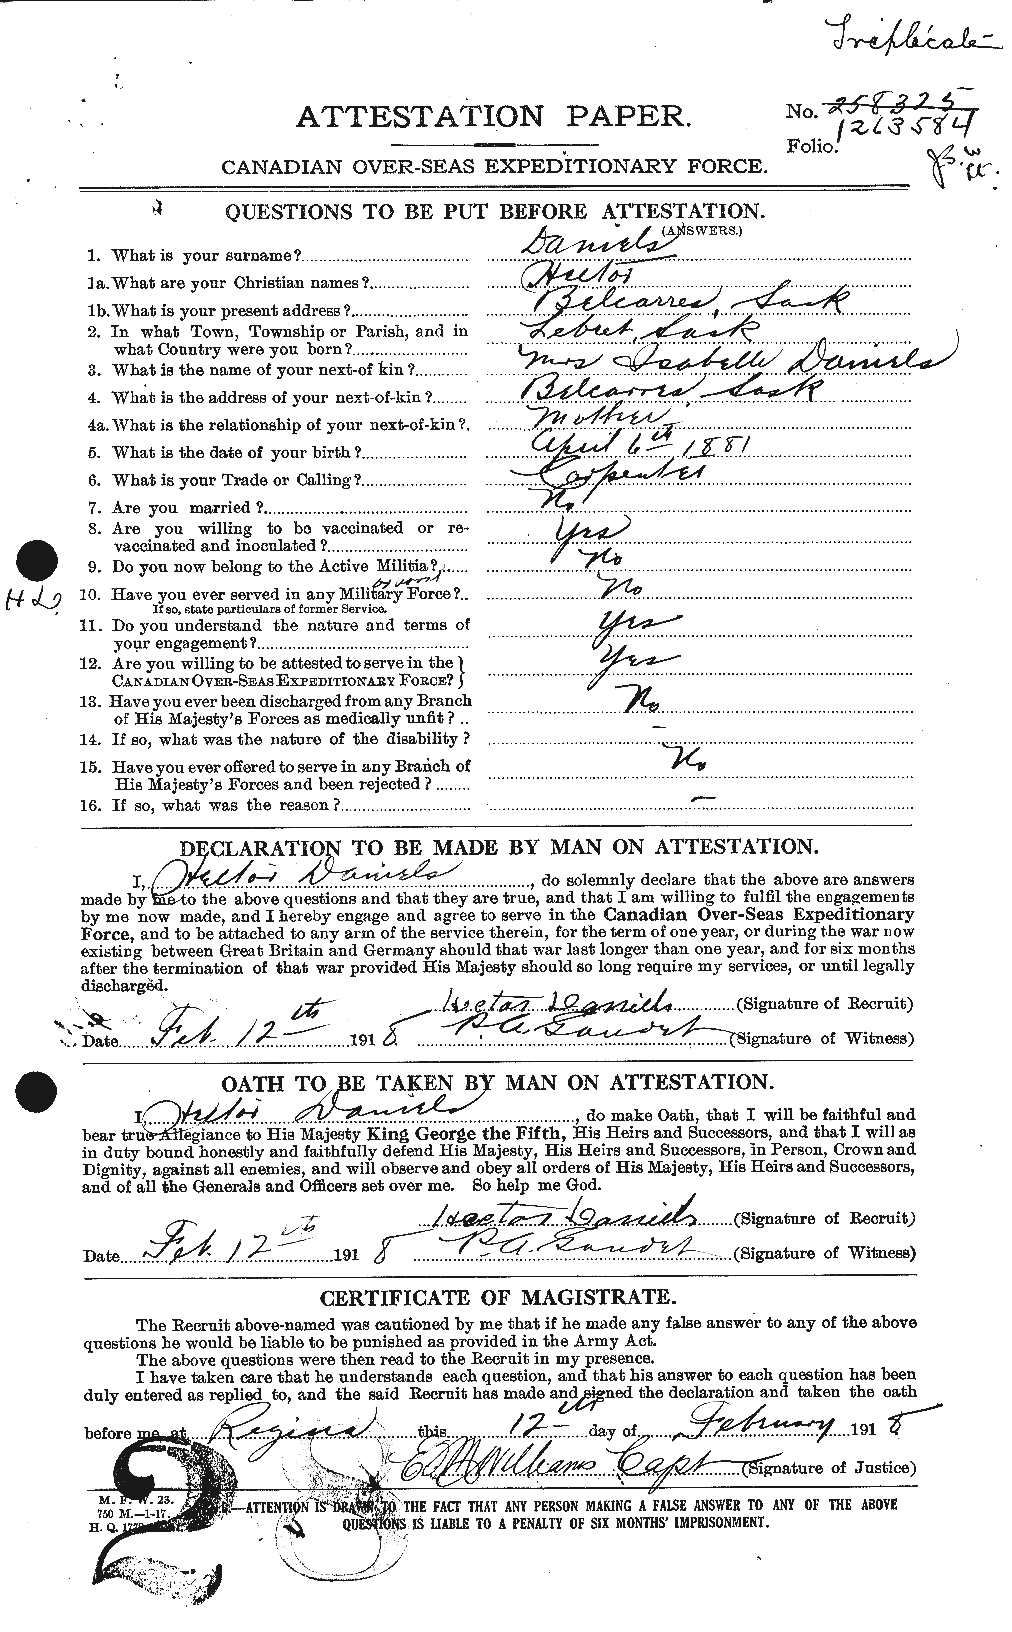 Personnel Records of the First World War - CEF 279614a